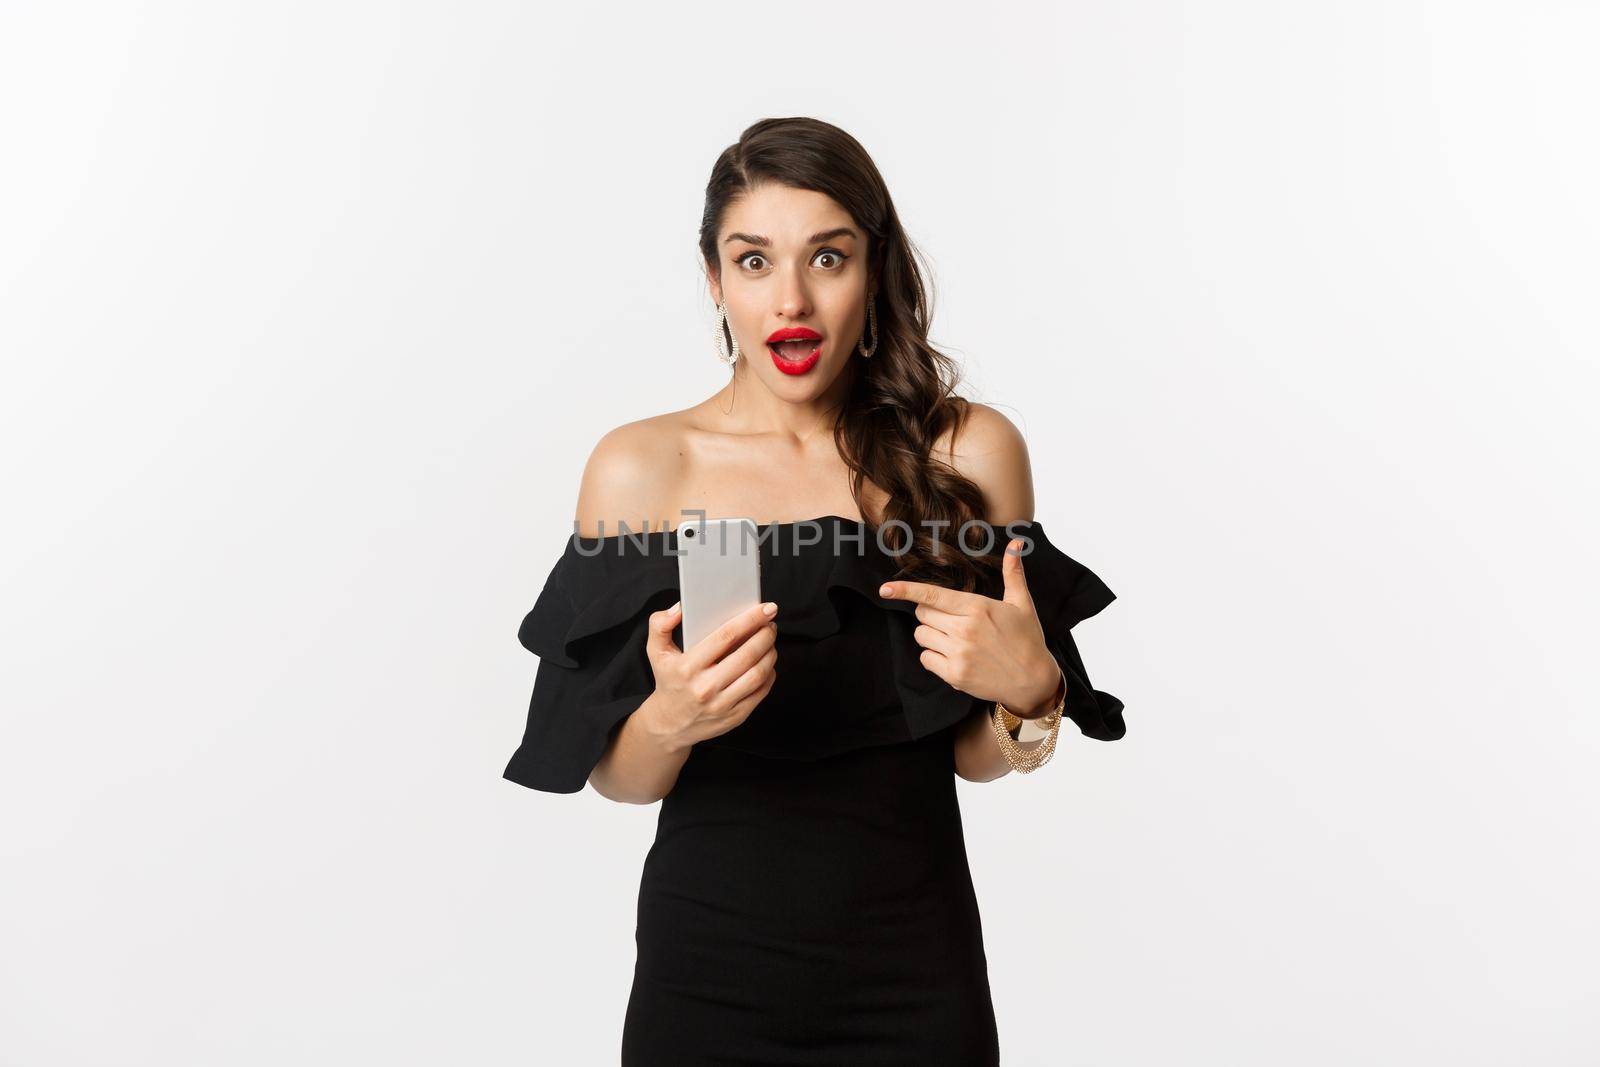 Online shopping concept. Stylish woman in black dress, wearing makeup, pointing finger at mobile phone with surprised emotion, standing over white background.